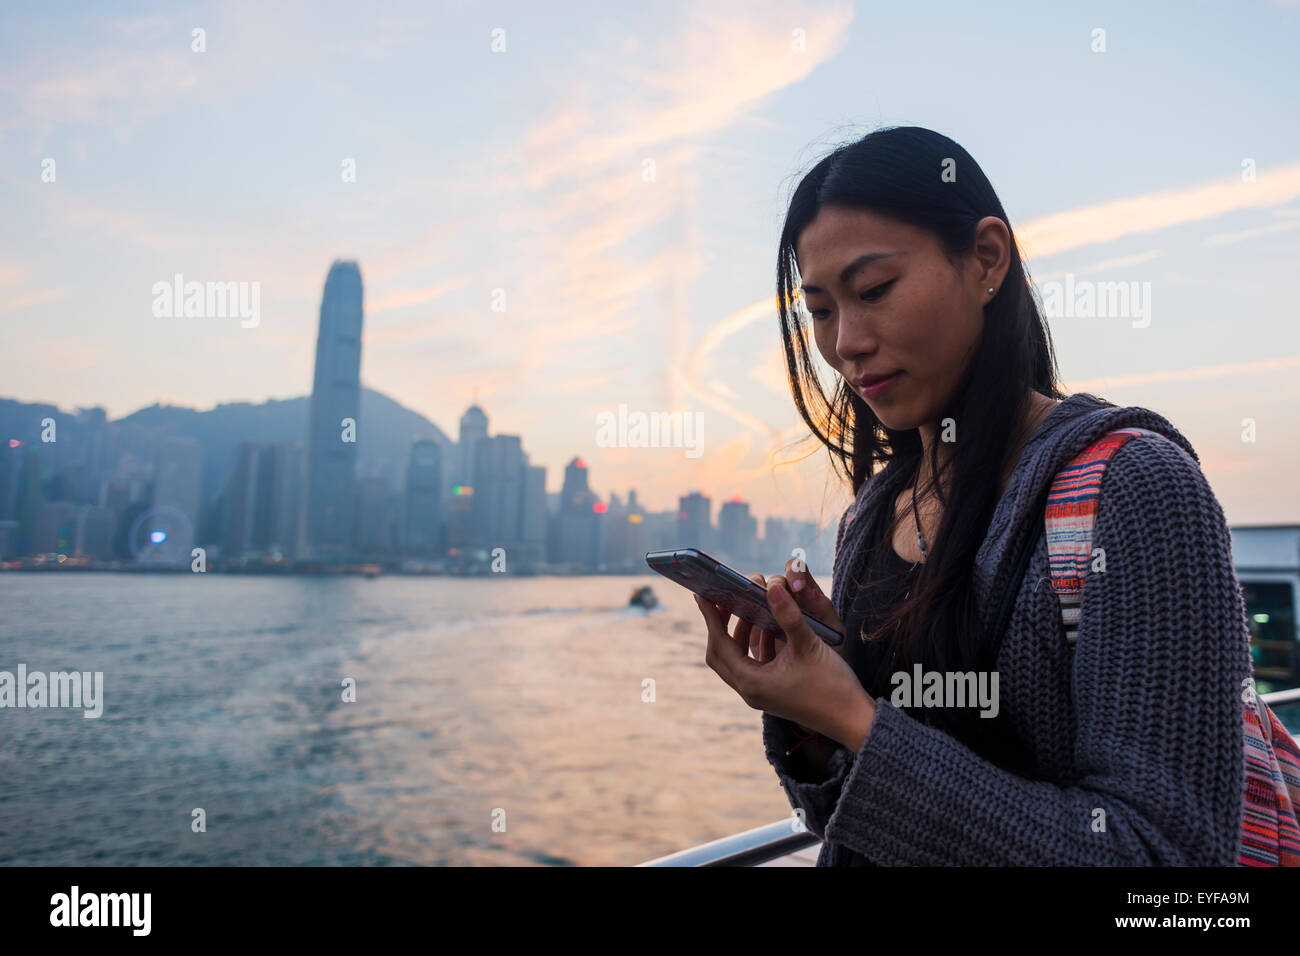 A young woman checks her cell phone at the waterfront with a view of the skyline at sunset, Kowloon; Hong Kong, China Stock Photo